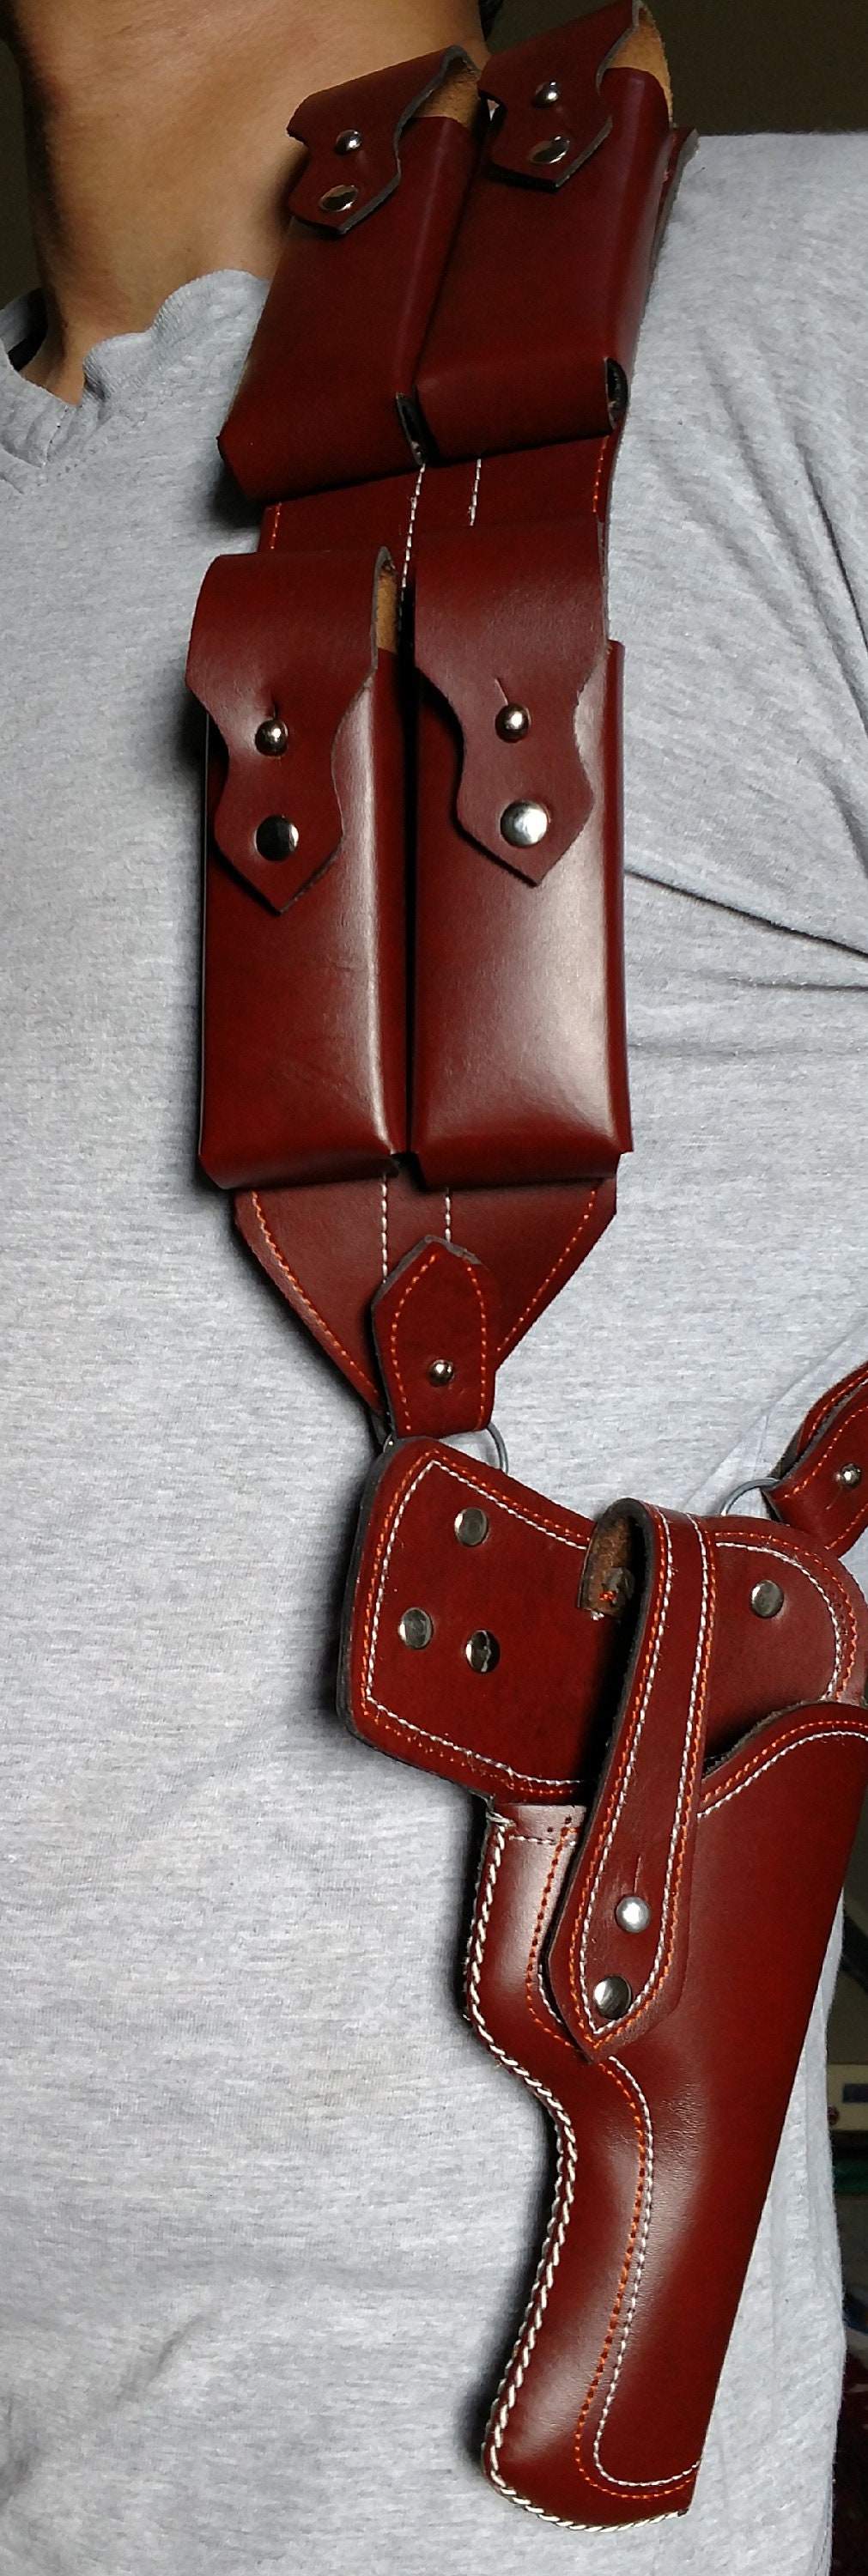 WoW Handcrafted Tokarev  pistol Stylish and amazing shoulder holster. TT-33 